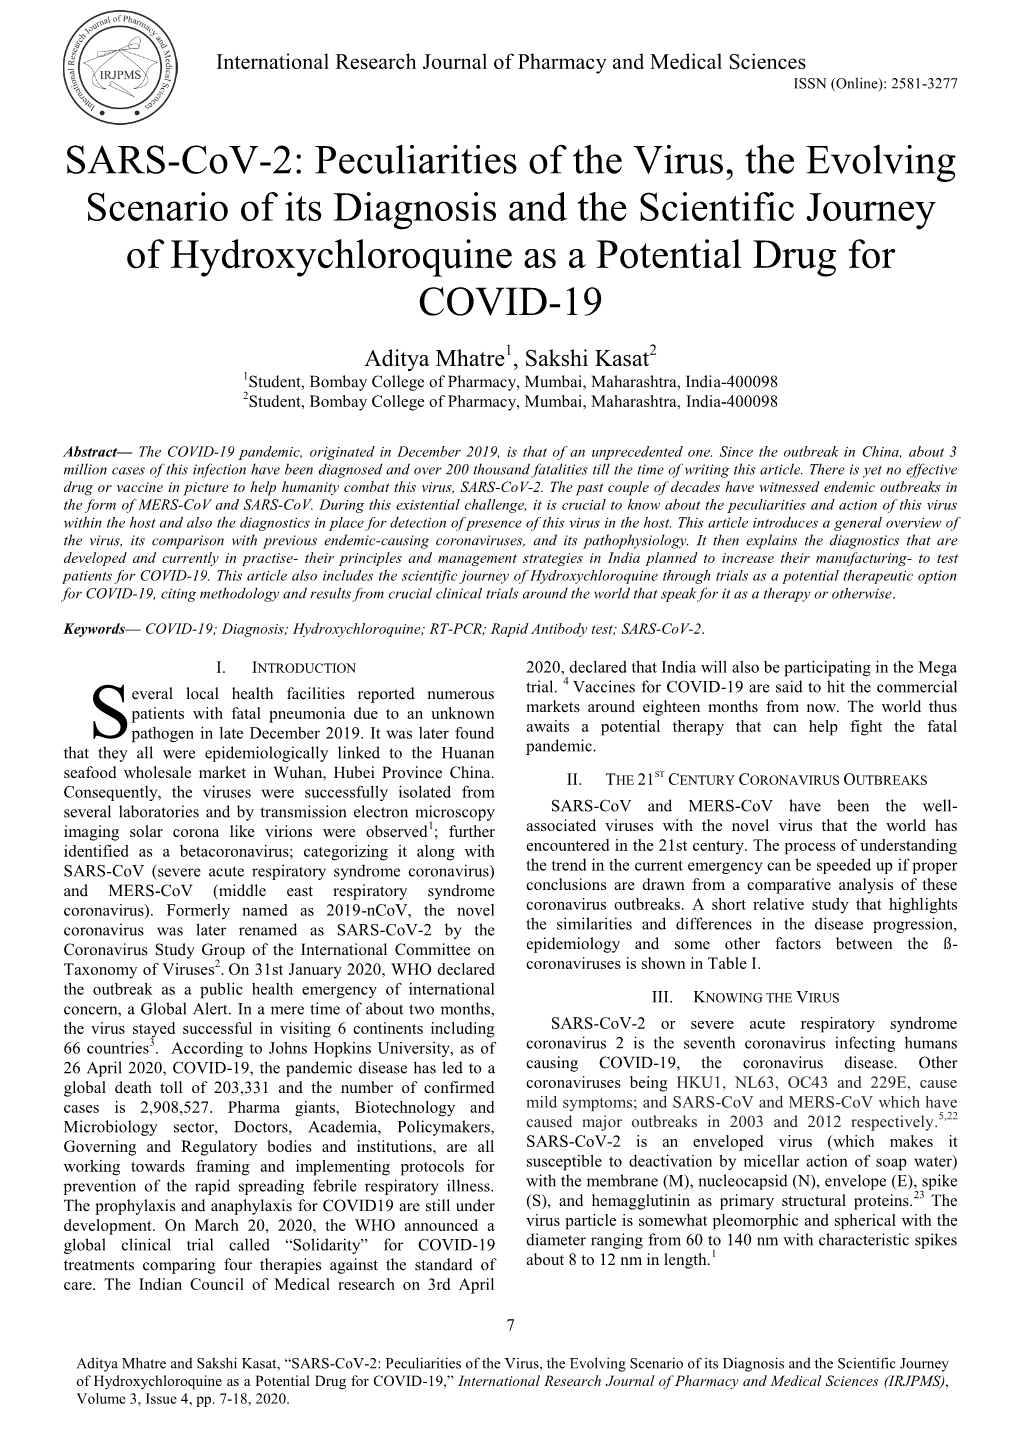 SARS-Cov-2: Peculiarities of the Virus, the Evolving Scenario of Its Diagnosis and the Scientific Journey of Hydroxychloroquine As a Potential Drug for COVID-19